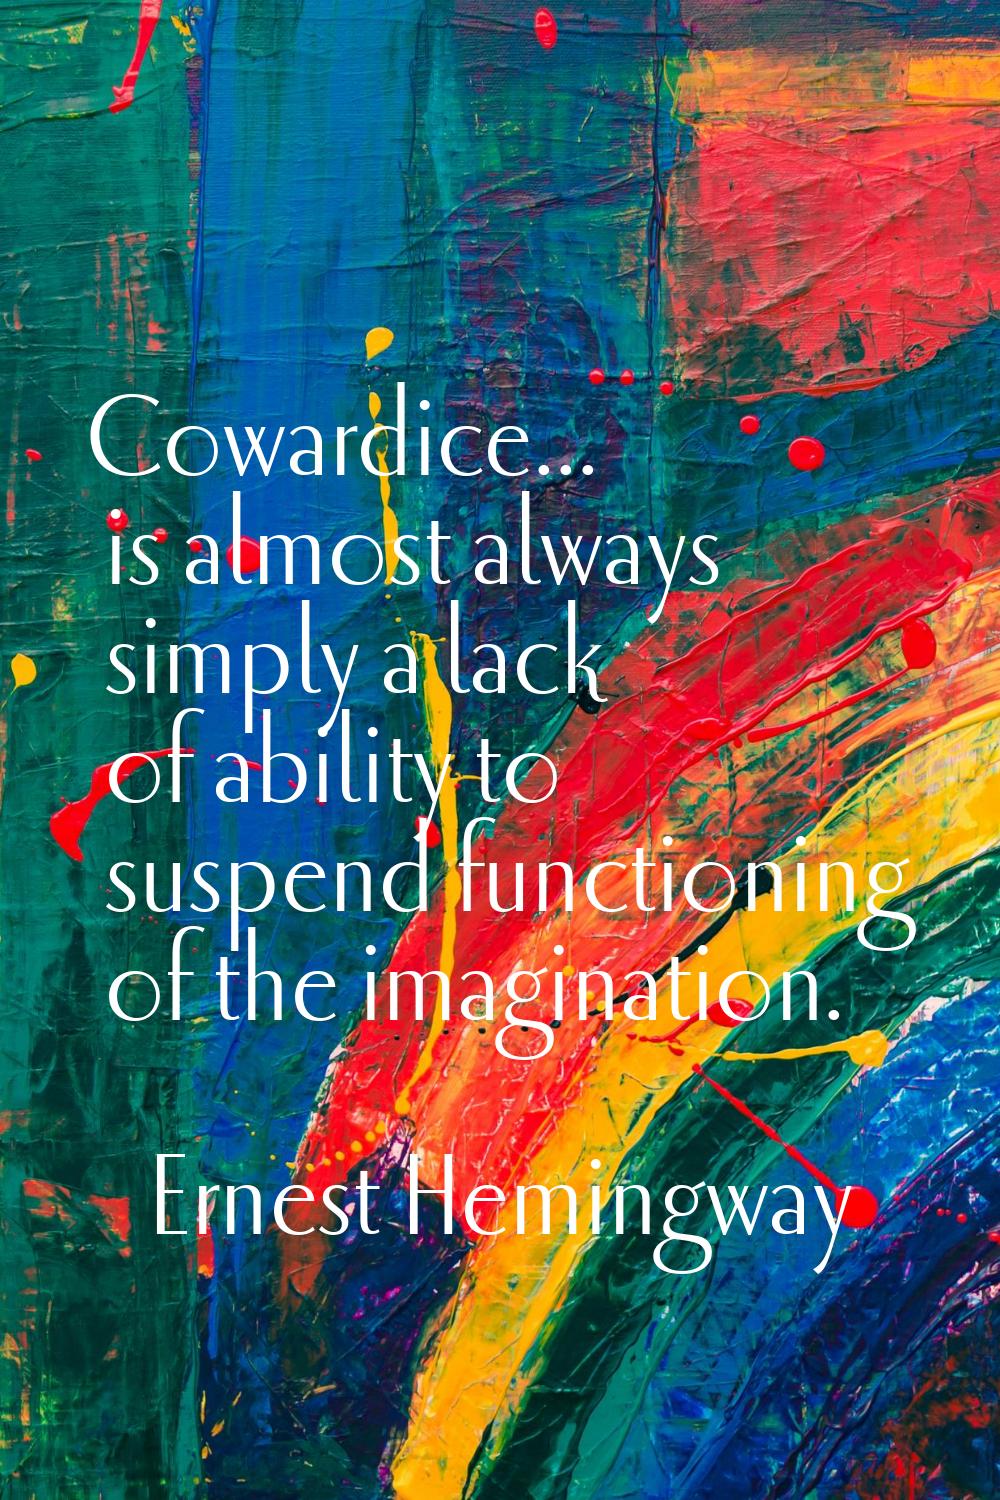 Cowardice... is almost always simply a lack of ability to suspend functioning of the imagination.